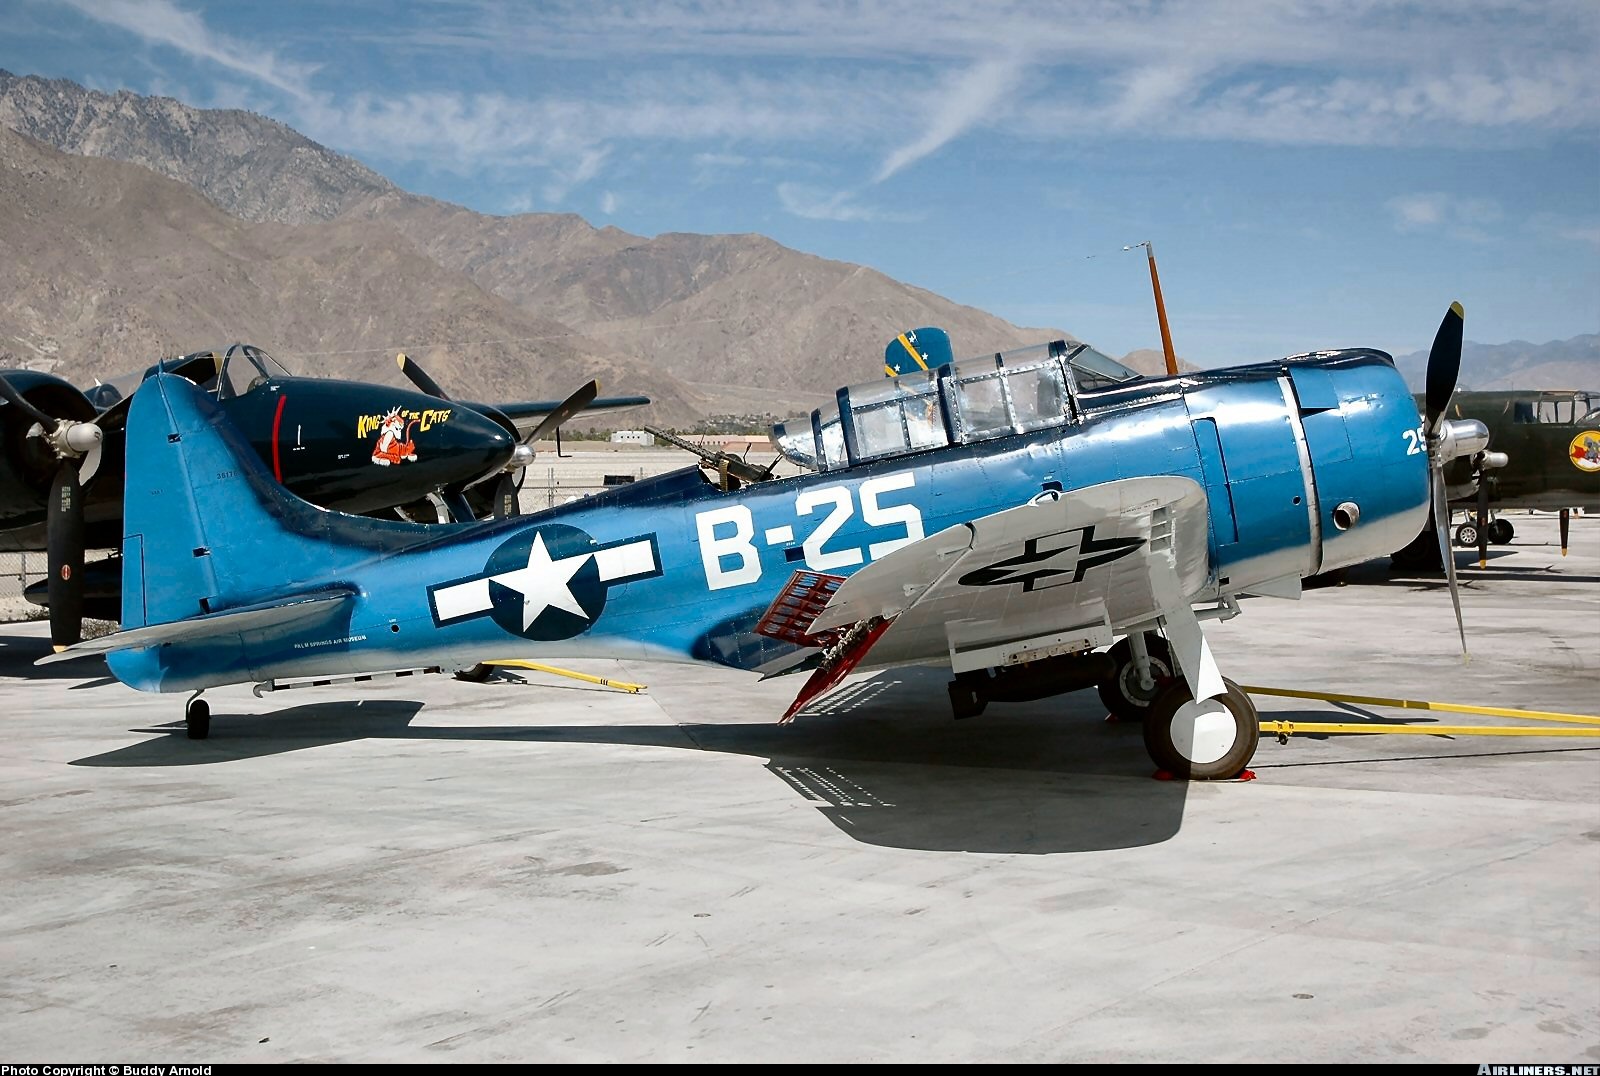 GOTHIC-AIR: DOUGLAS SBD-5 DAUNTLESS (The most successful 